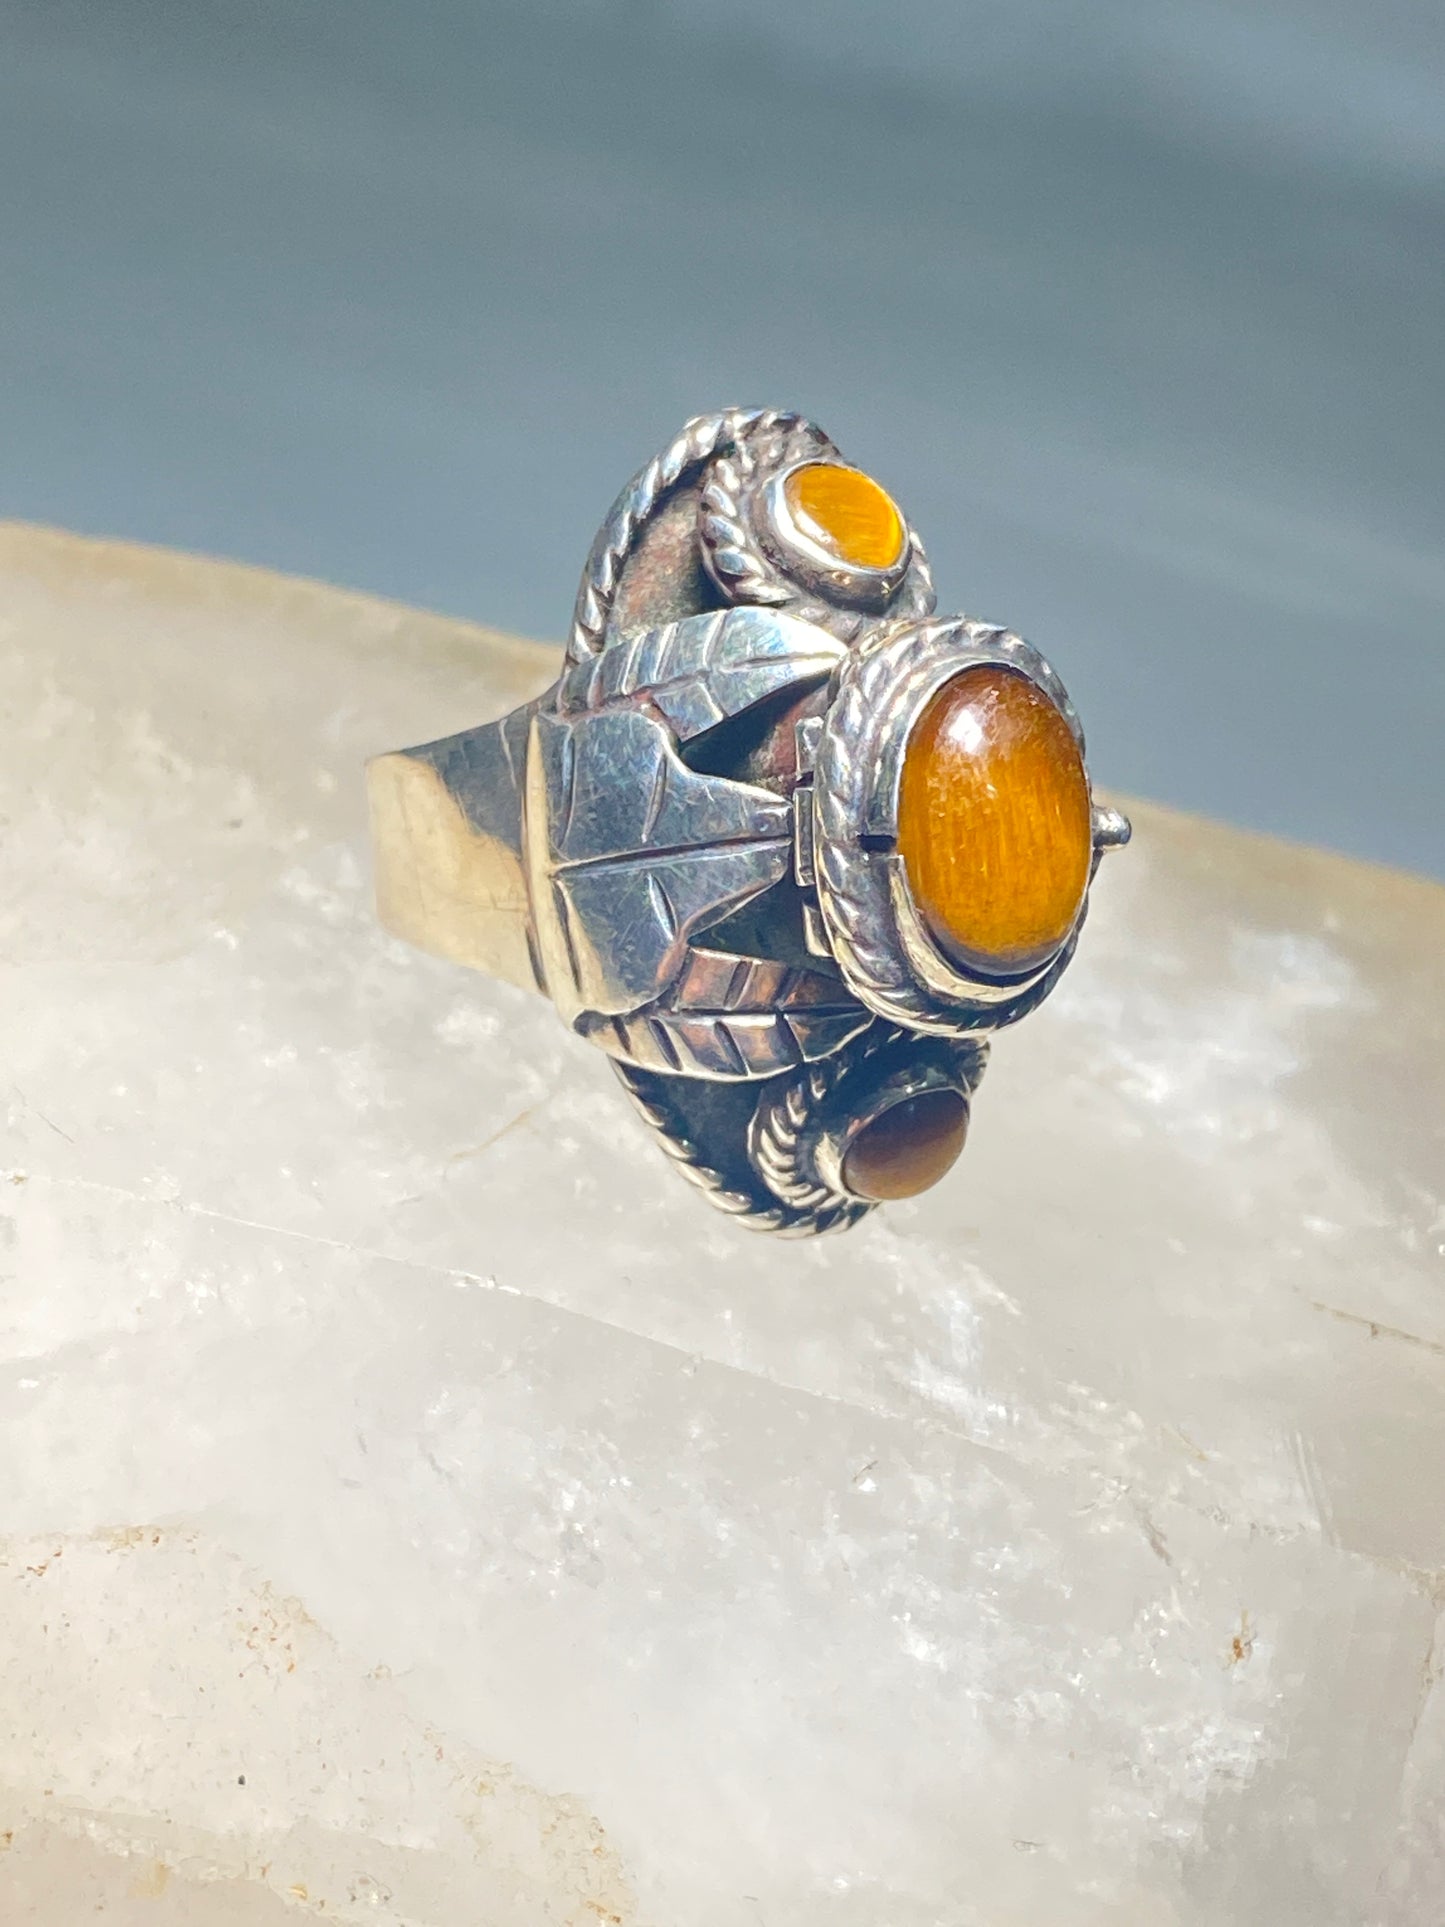 Poison ring size 8 tiger eye Mexico  leaf sterling silver women